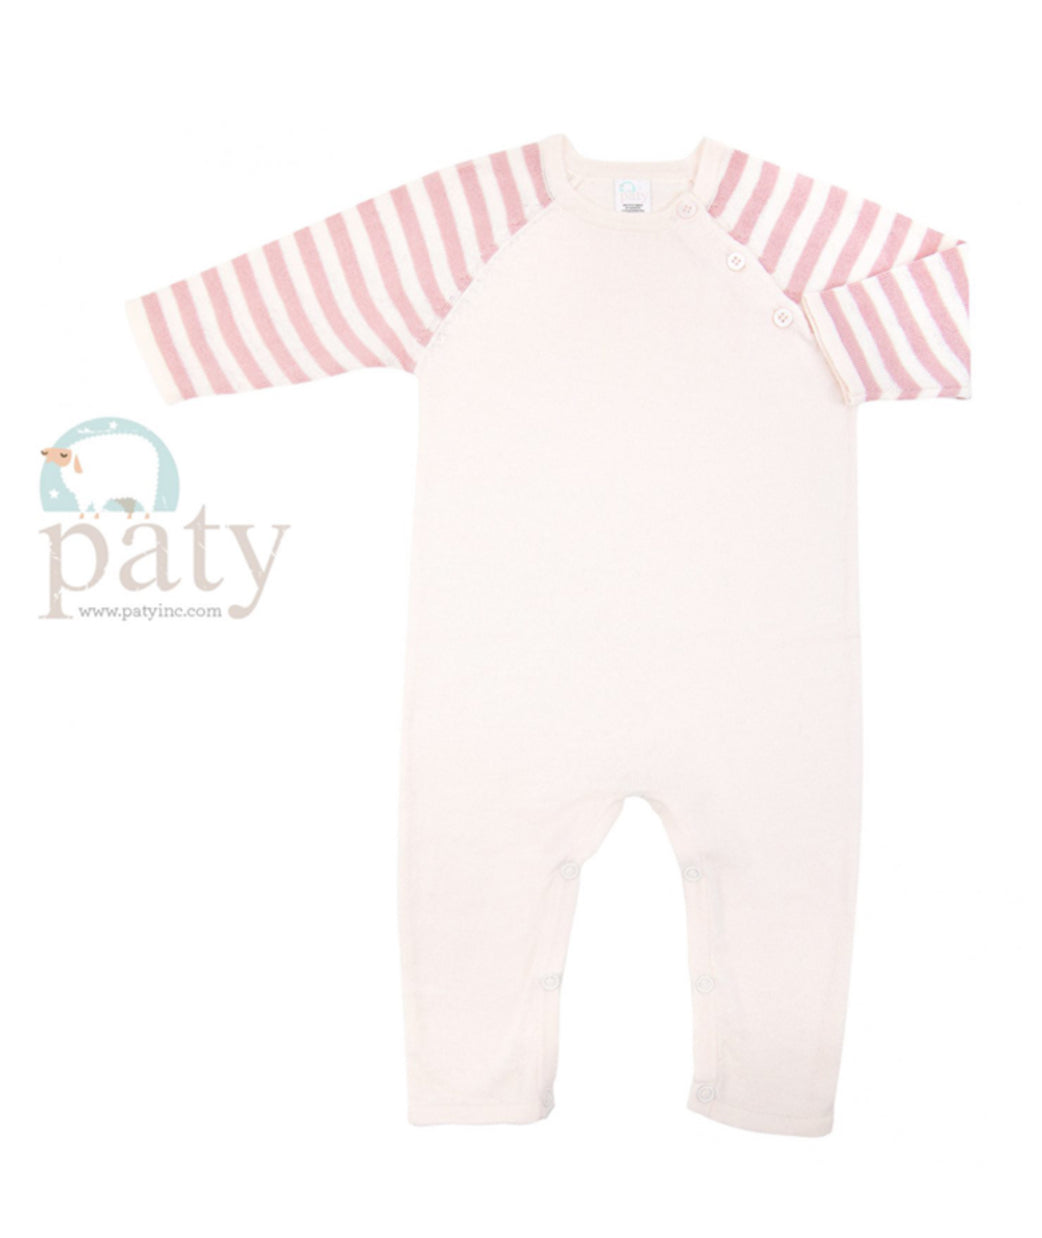 Paty Knit Romper-Pink (6 months)